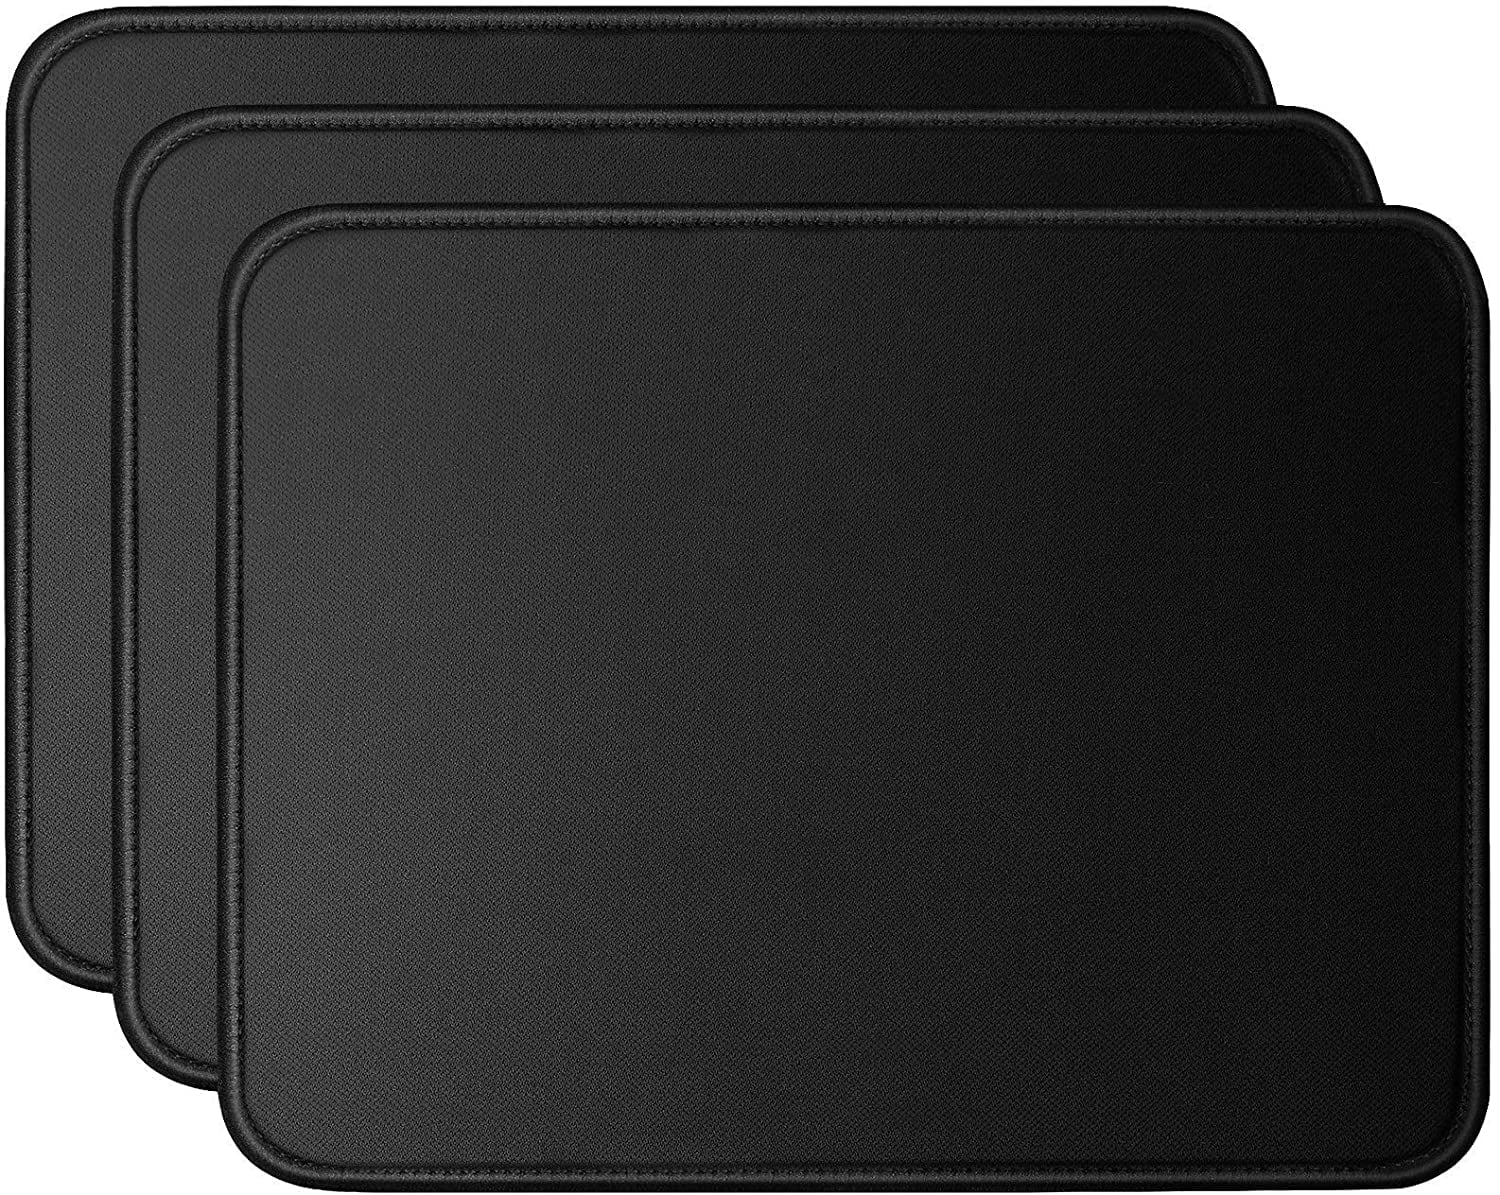 Stitched Edges & Non-Slip Base For Laptop Computer PC Soft Gaming Mouse Pad w 